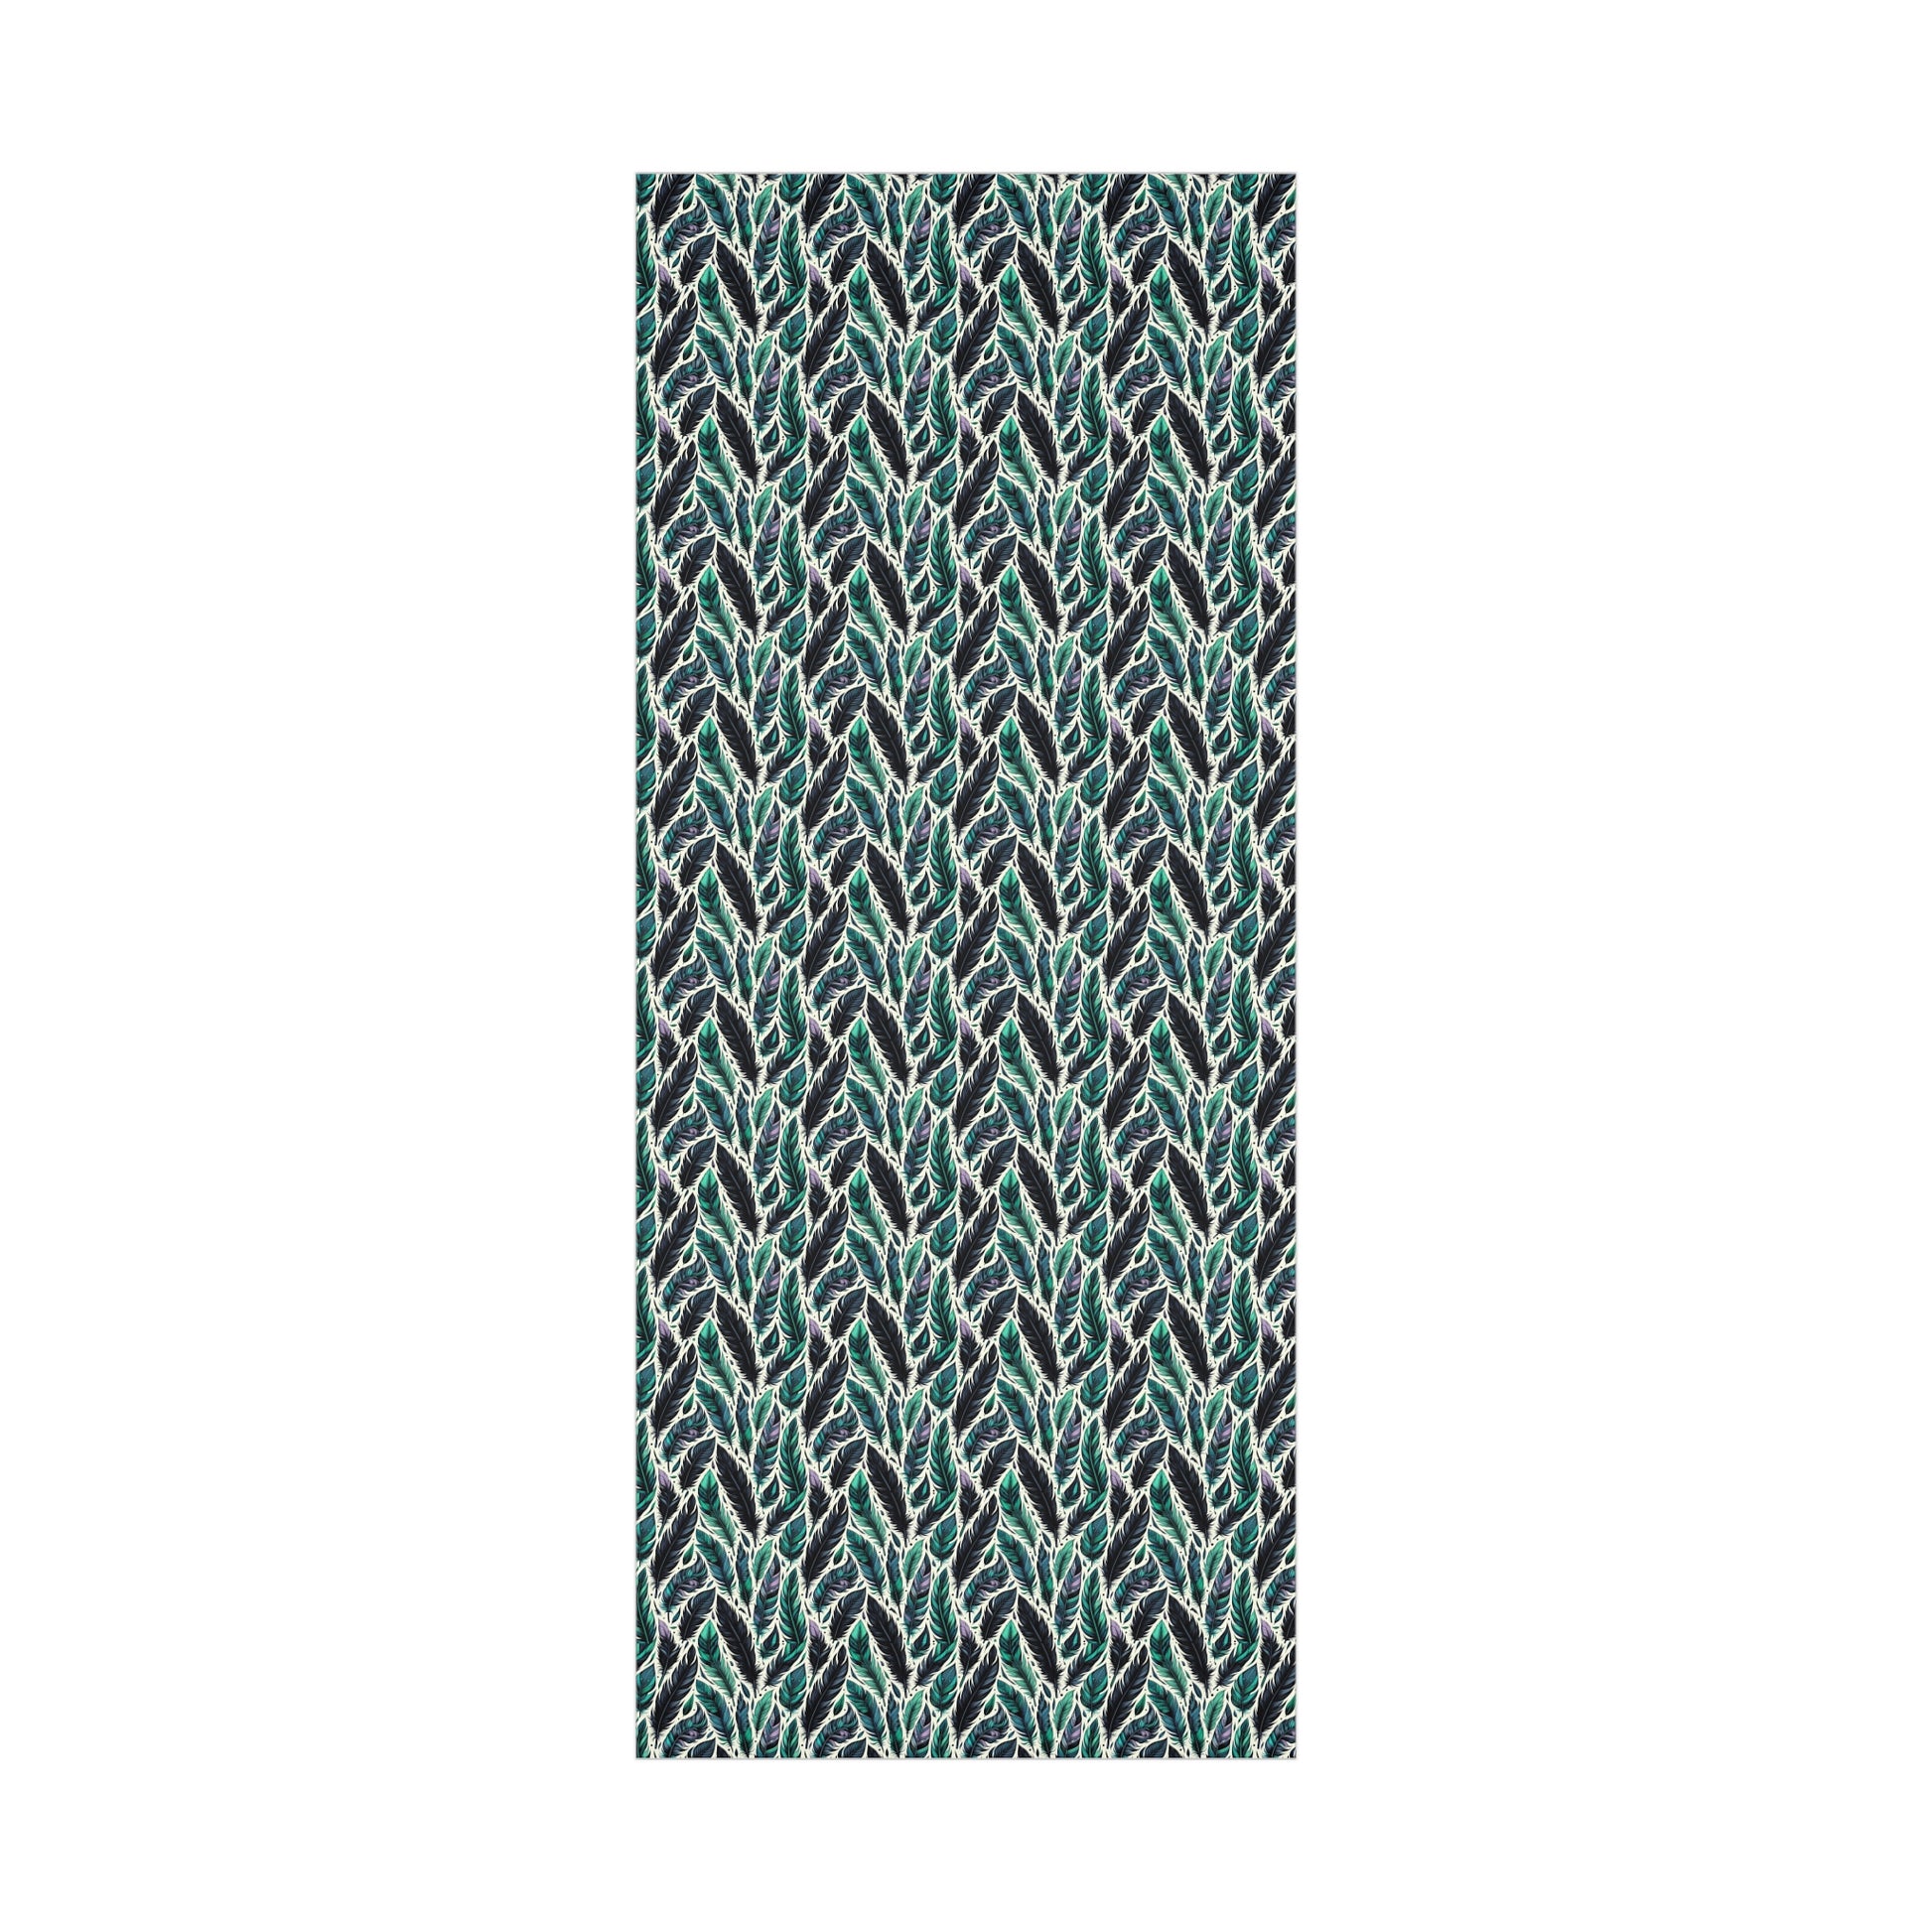 Teal Feathers Gift Wrap Papers, Birds of Valhalla, Home Decor, Printify